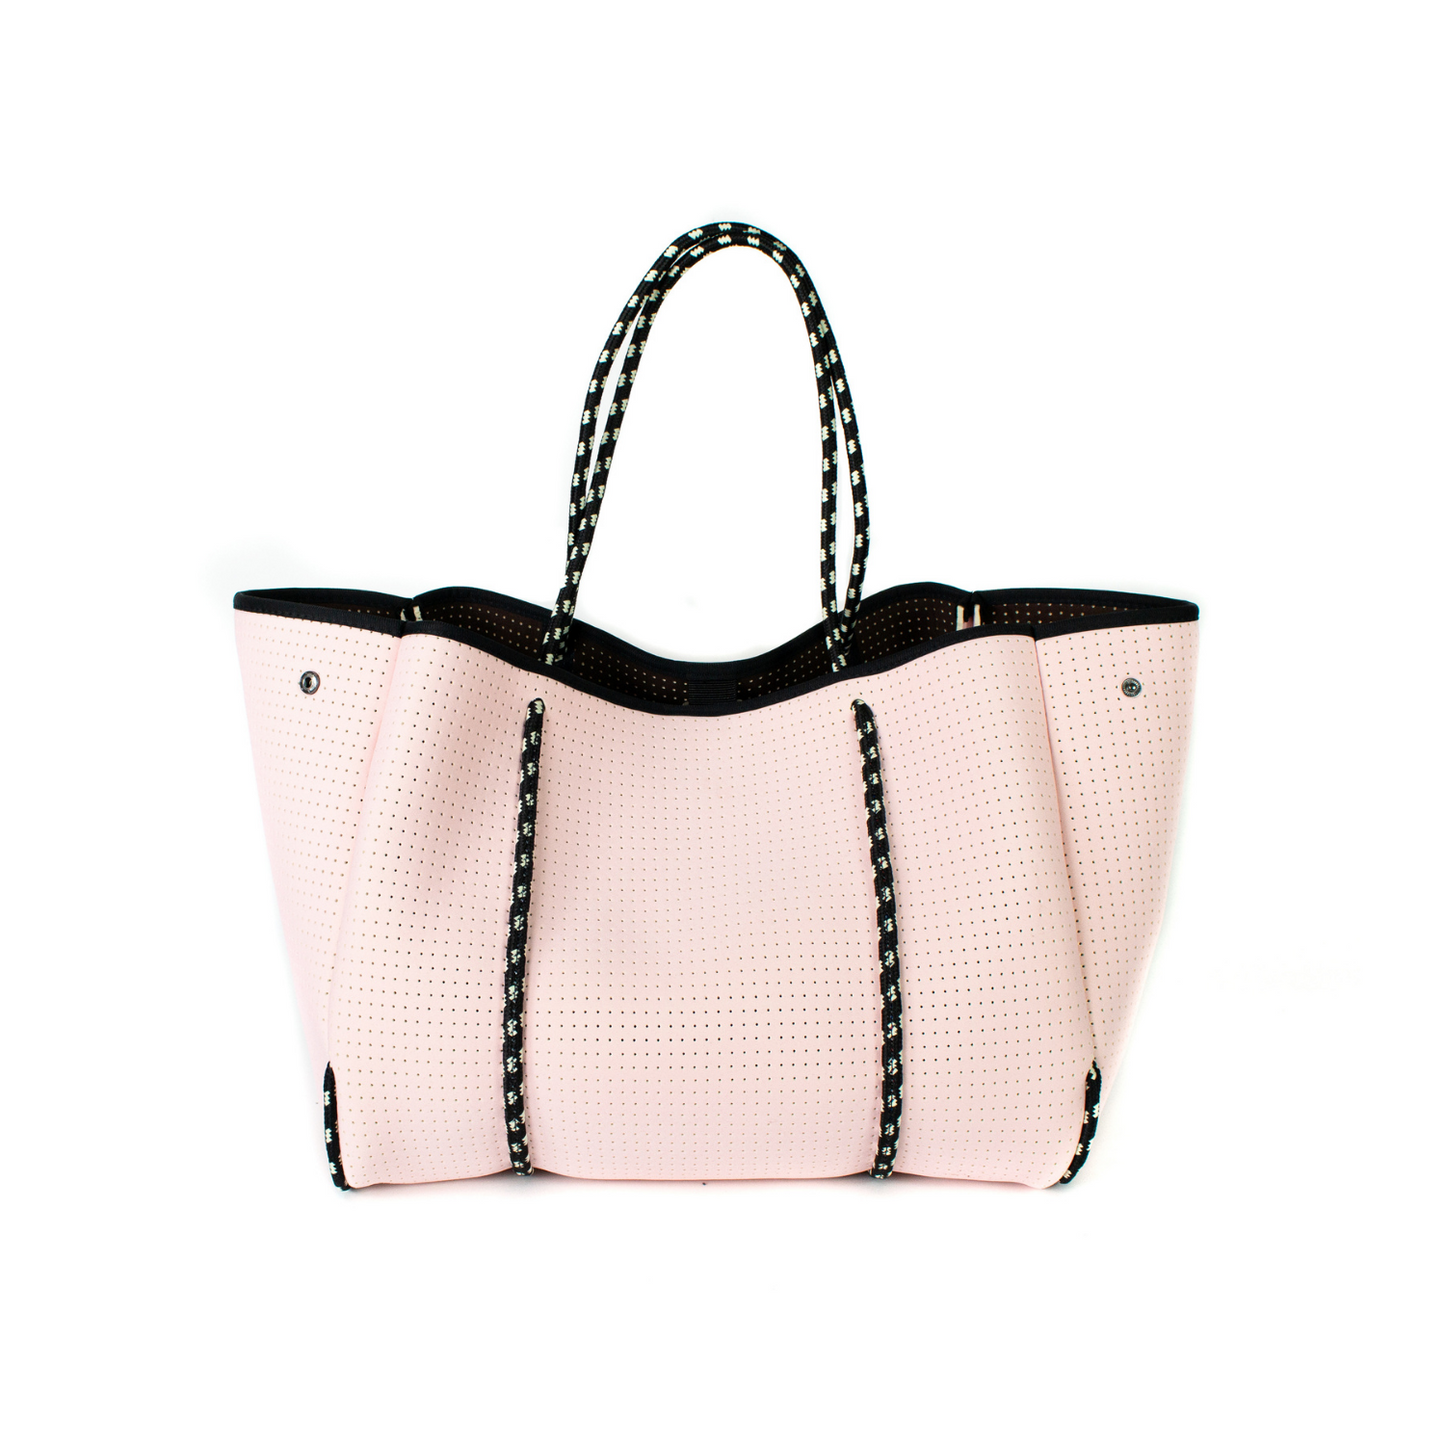 CAMERA BAG + FLAP CROSSBODY + EVERYDAY TOTE - PRETTY IN PINK